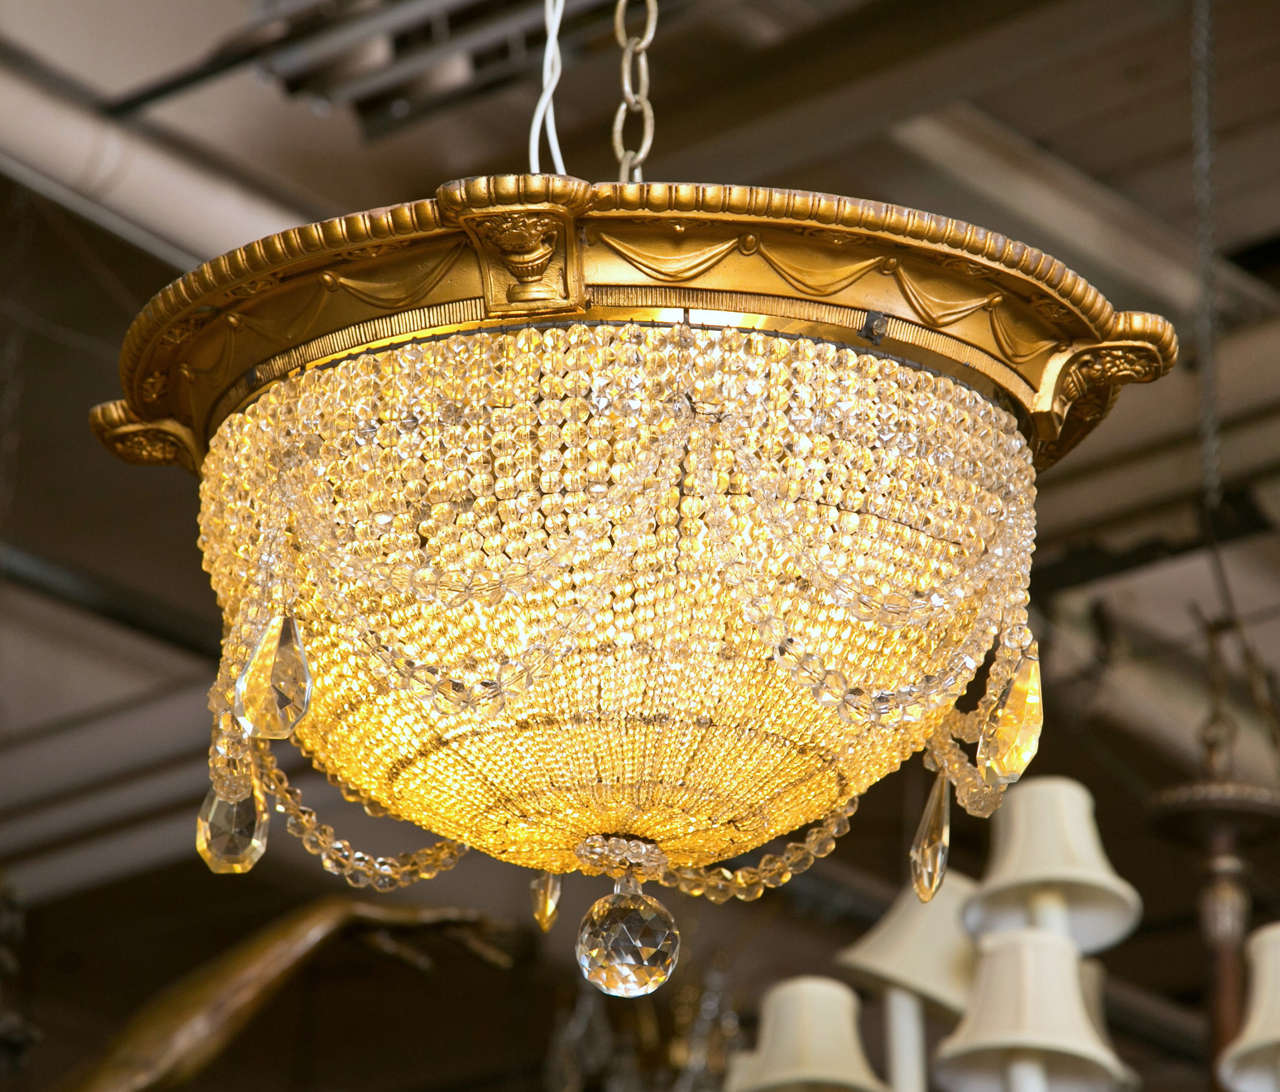 Gorgeous ceiling mount fixture.  All original antique crystal beaded dome chandelier.  The beading graduates in size from petite carats to larger perfect baubles of light. The top has a beautiful brass finished white metal ring rimmed with filigree.